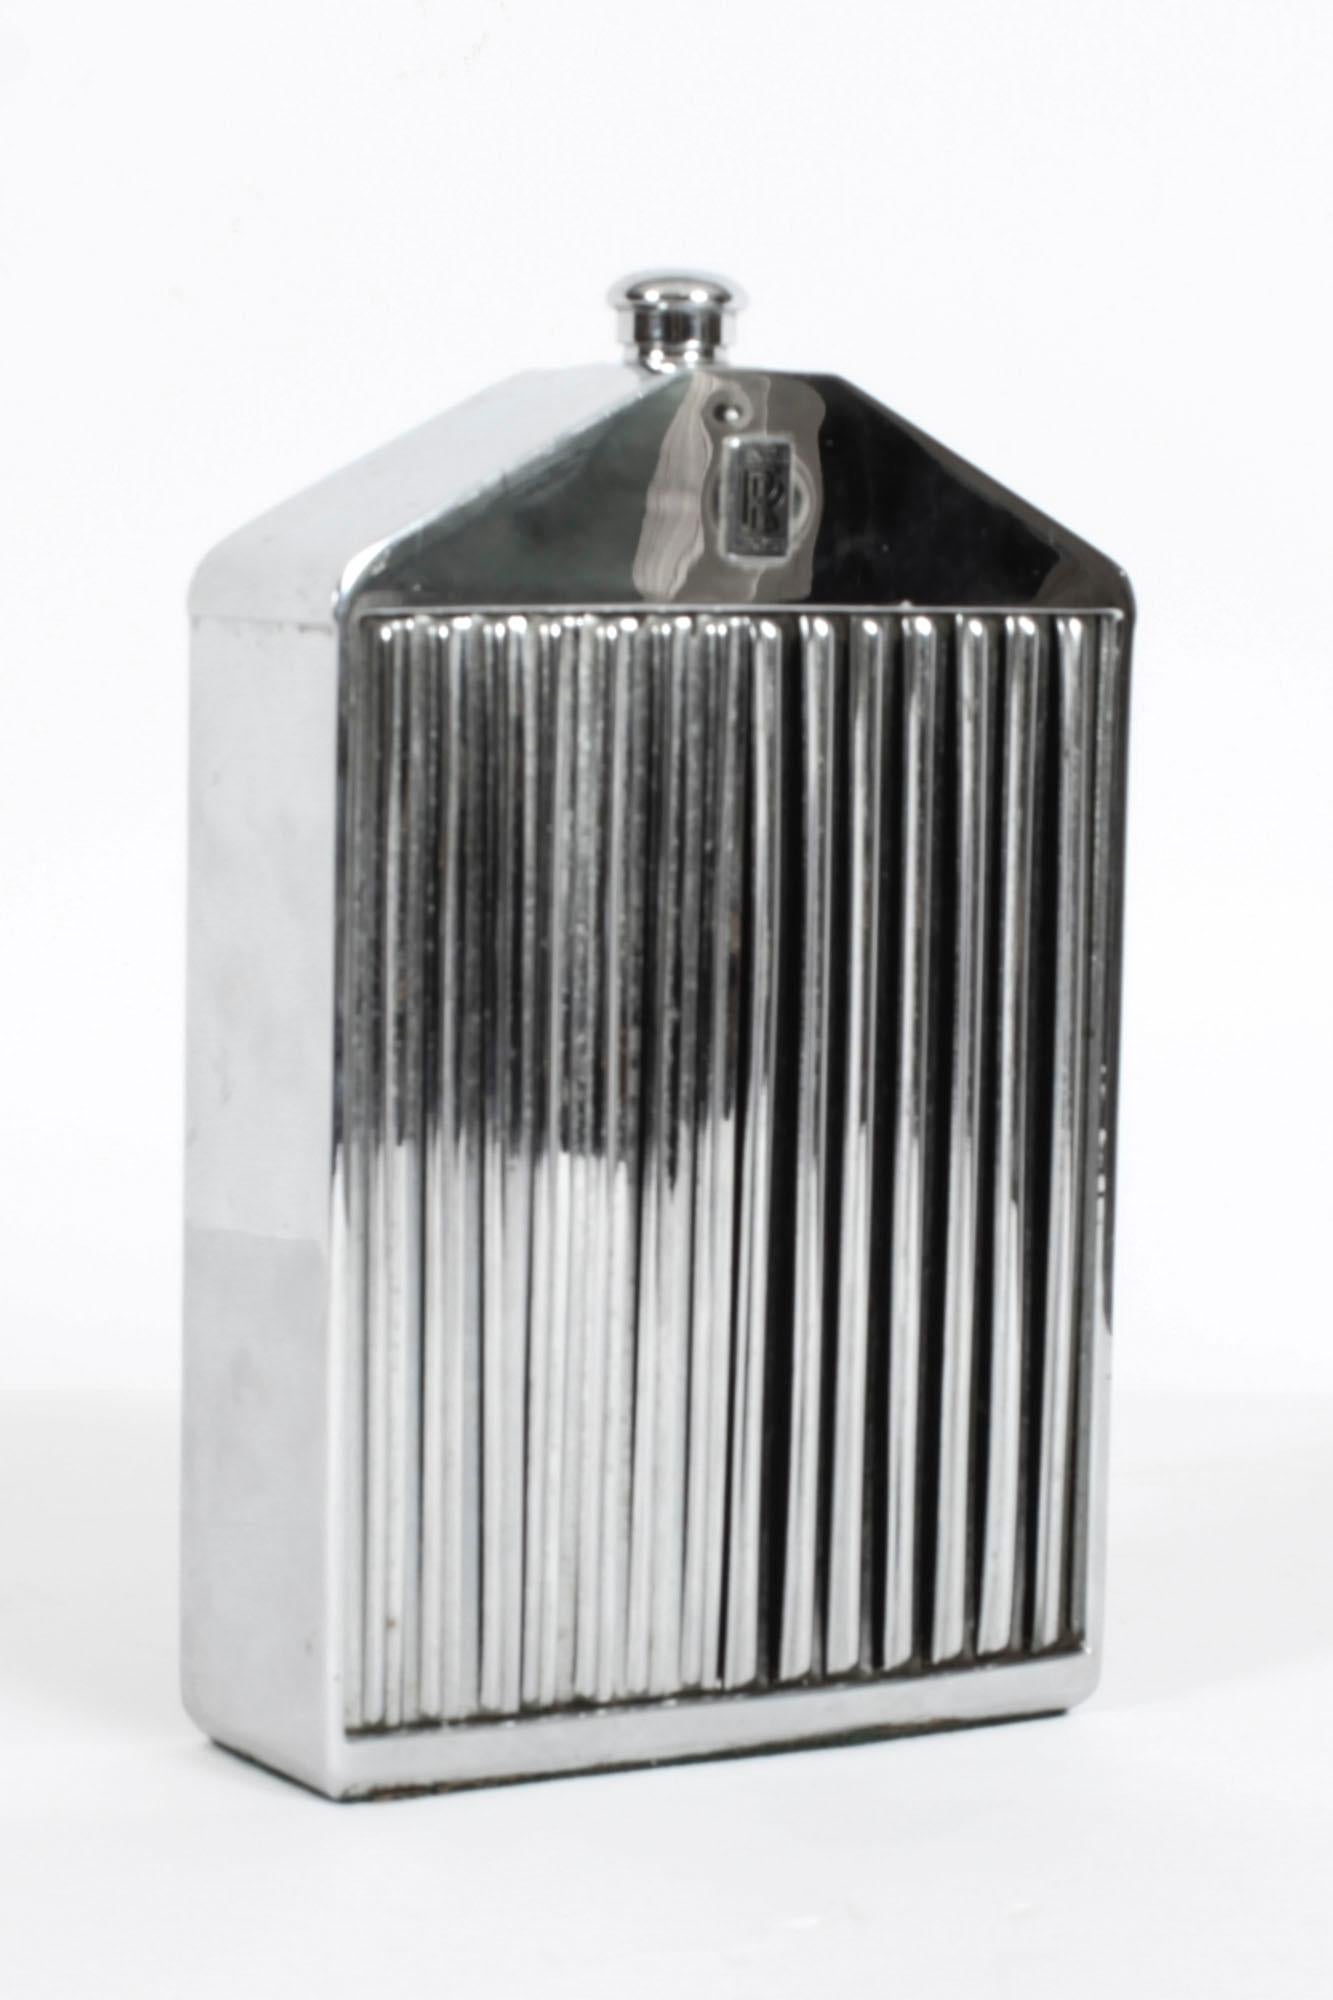 This Iconic Rolls-Royce radiator shaped decanter was made by “Ruddspeed Ltd”, “(England)”, “Reg. Design No 910435. ,circa 1960 in date.

These were sold by high end retail establishments such as Harrods of London.

The case is heavy chromium